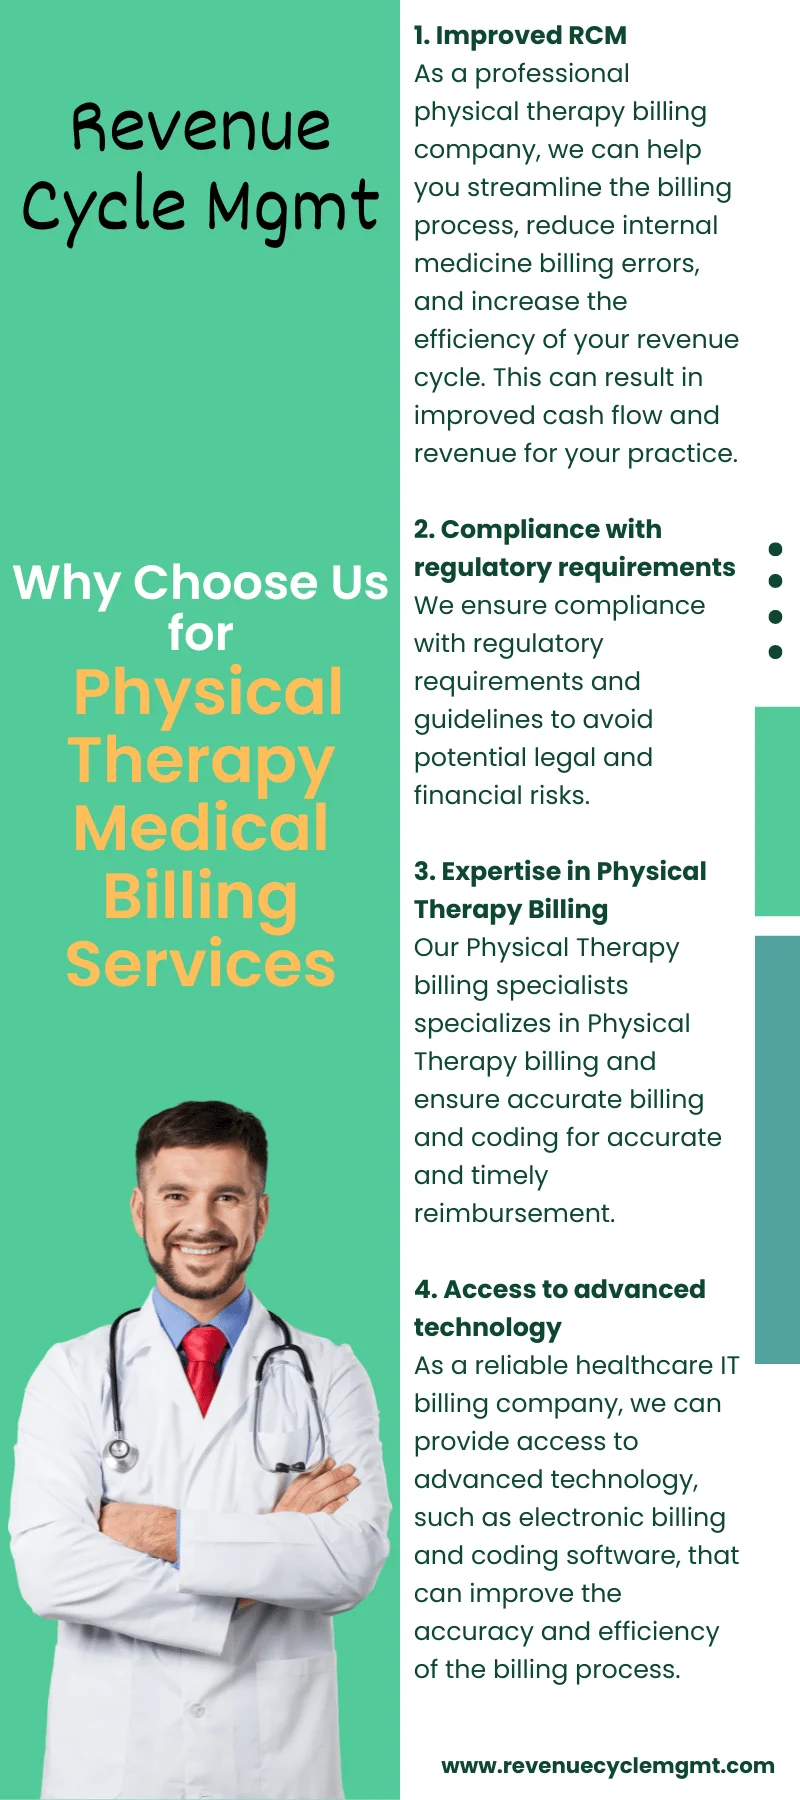 Why Choose Us for Physical Therapy Medical Billing Services